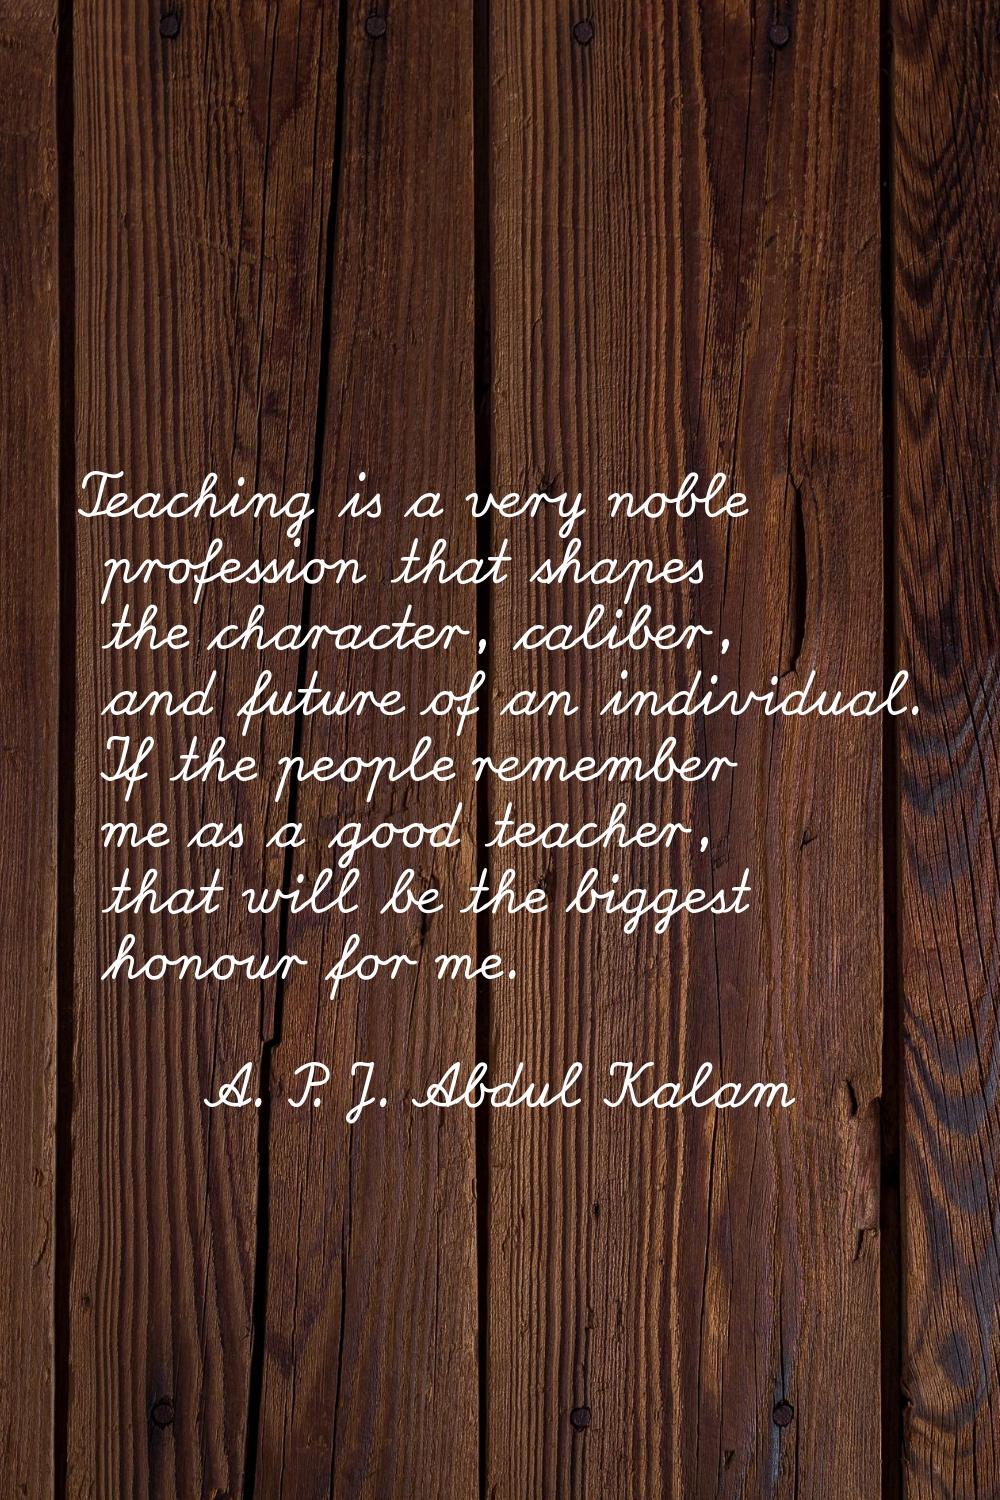 Teaching is a very noble profession that shapes the character, caliber, and future of an individual